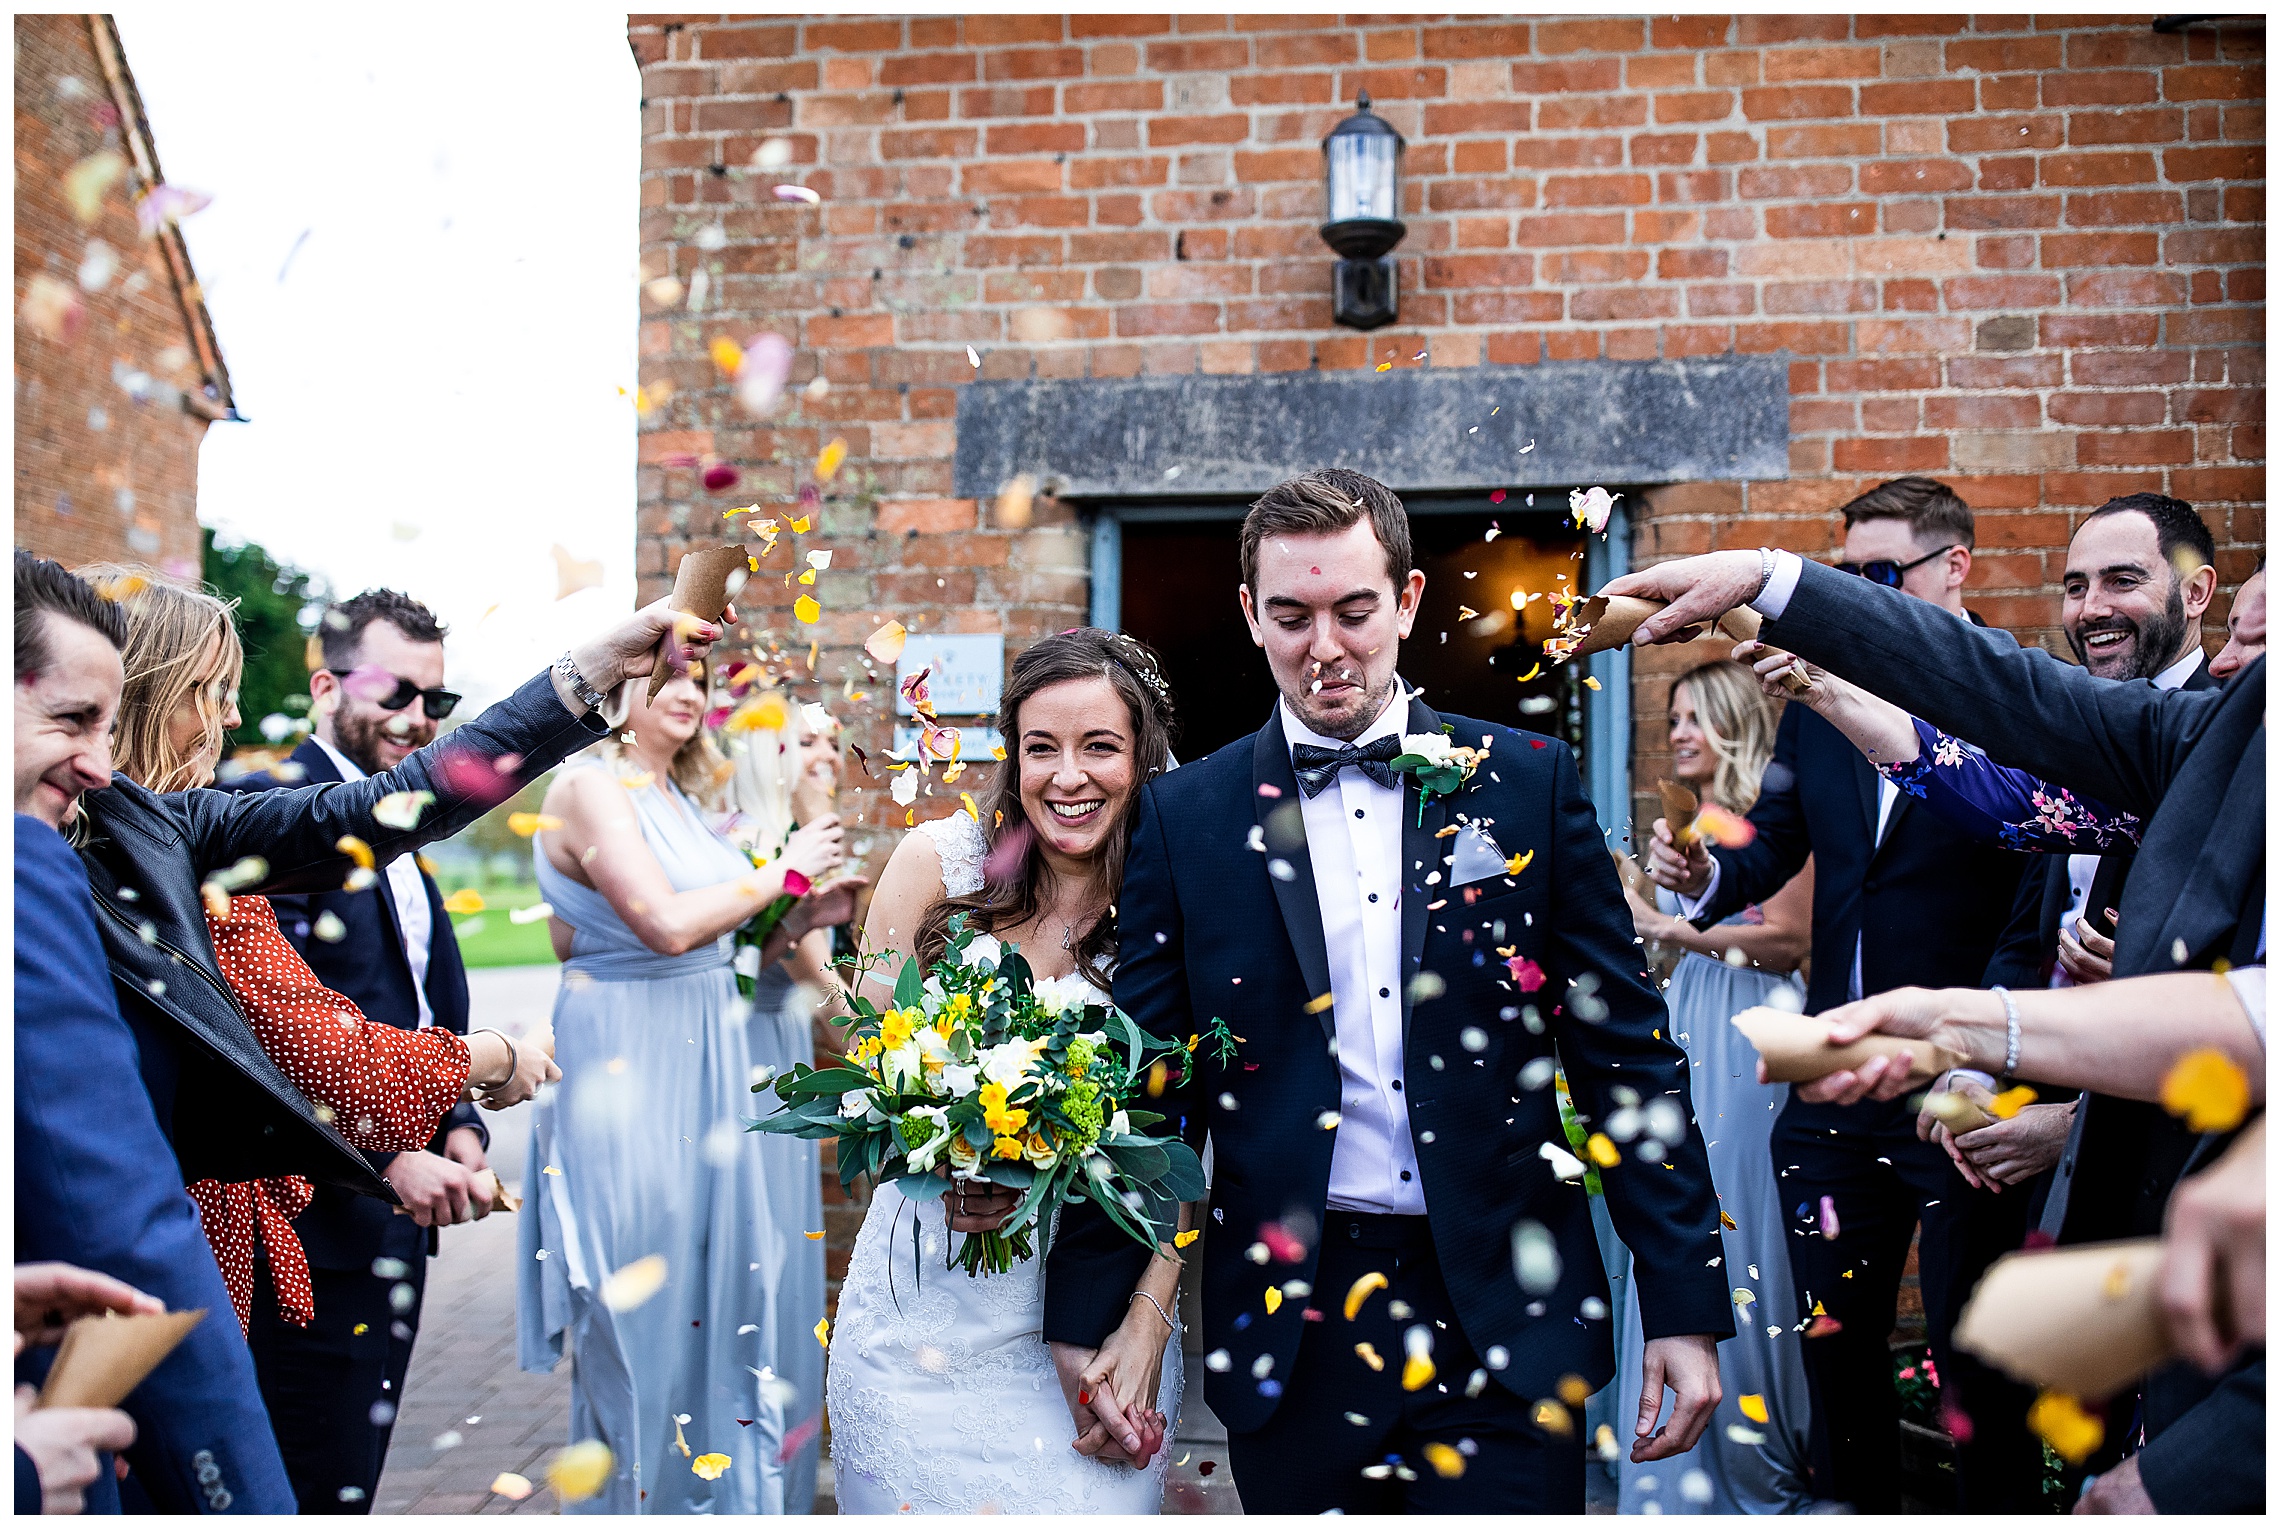 confetti being thrown at wedding guests